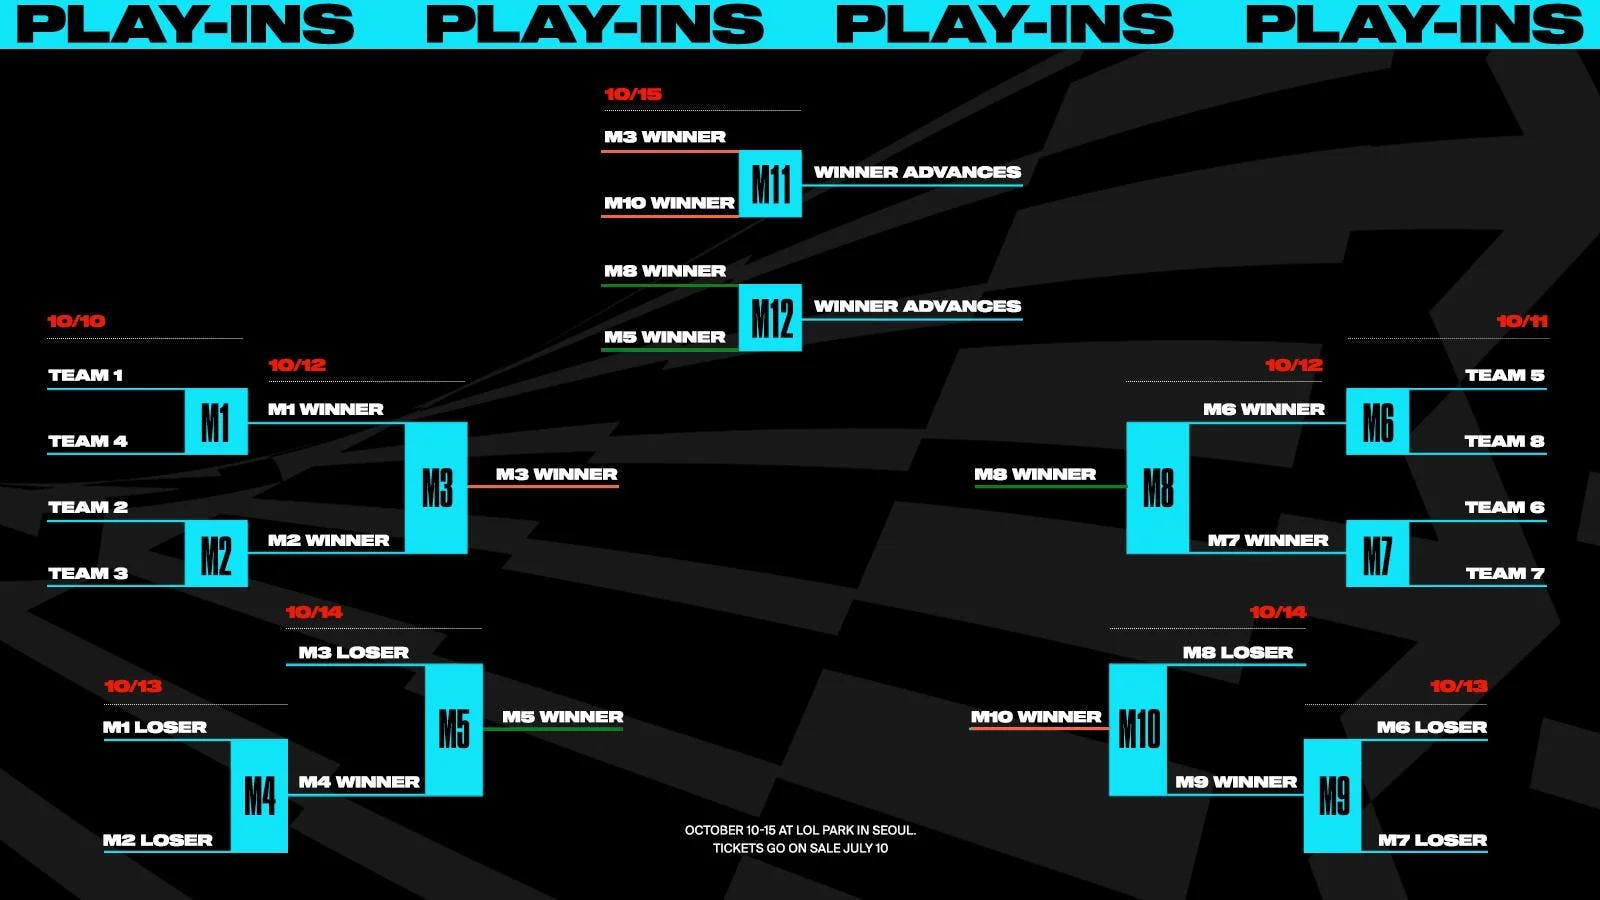 The format for the Play-Ins Stage